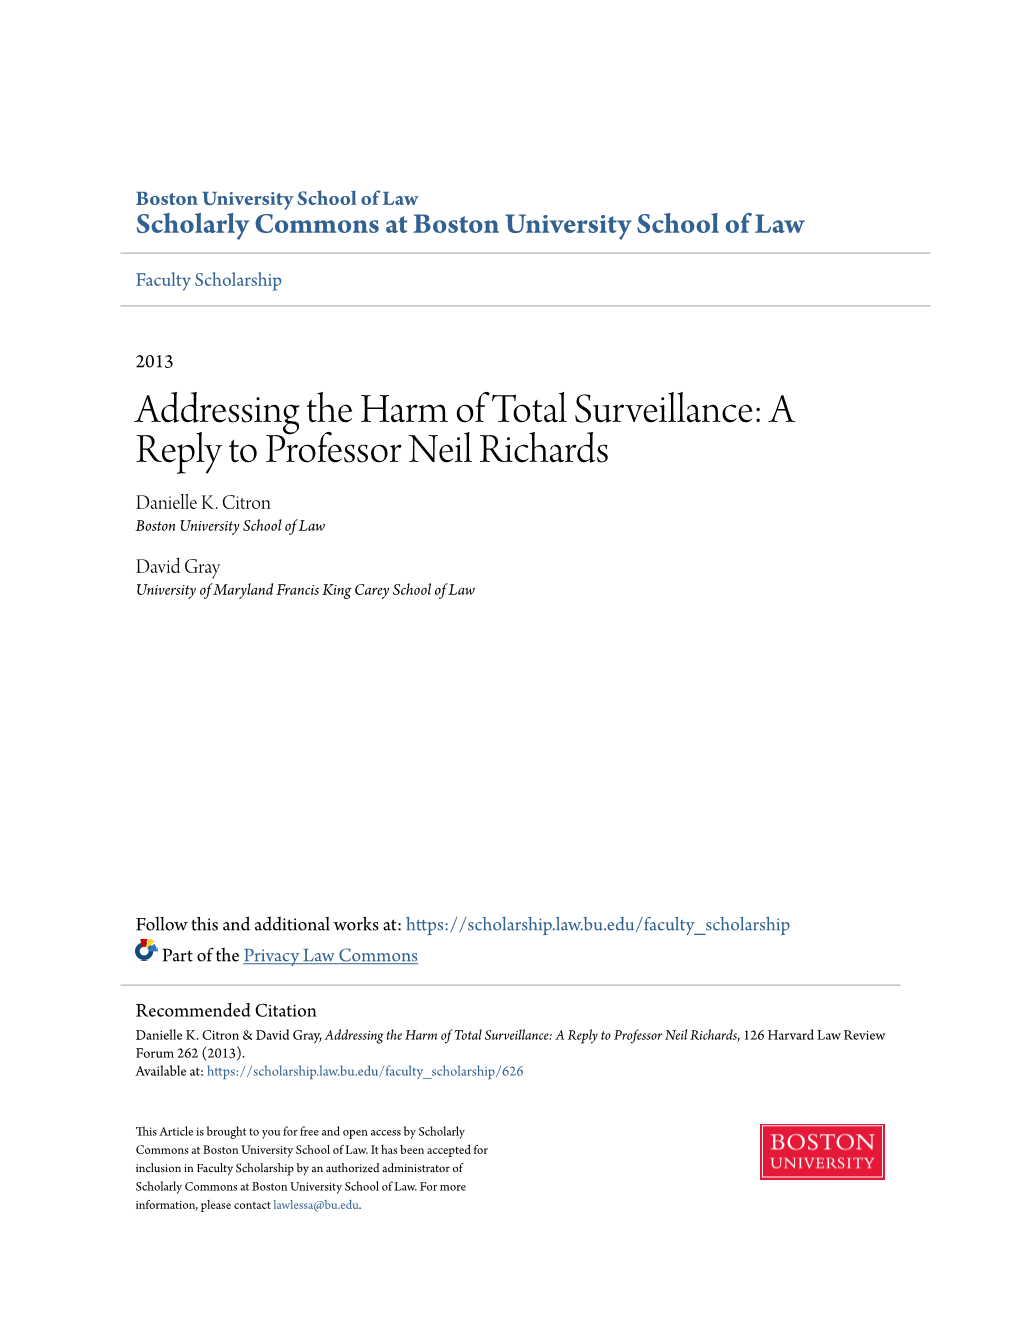 Addressing the Harm of Total Surveillance: a Reply to Professor Neil Richards Danielle K